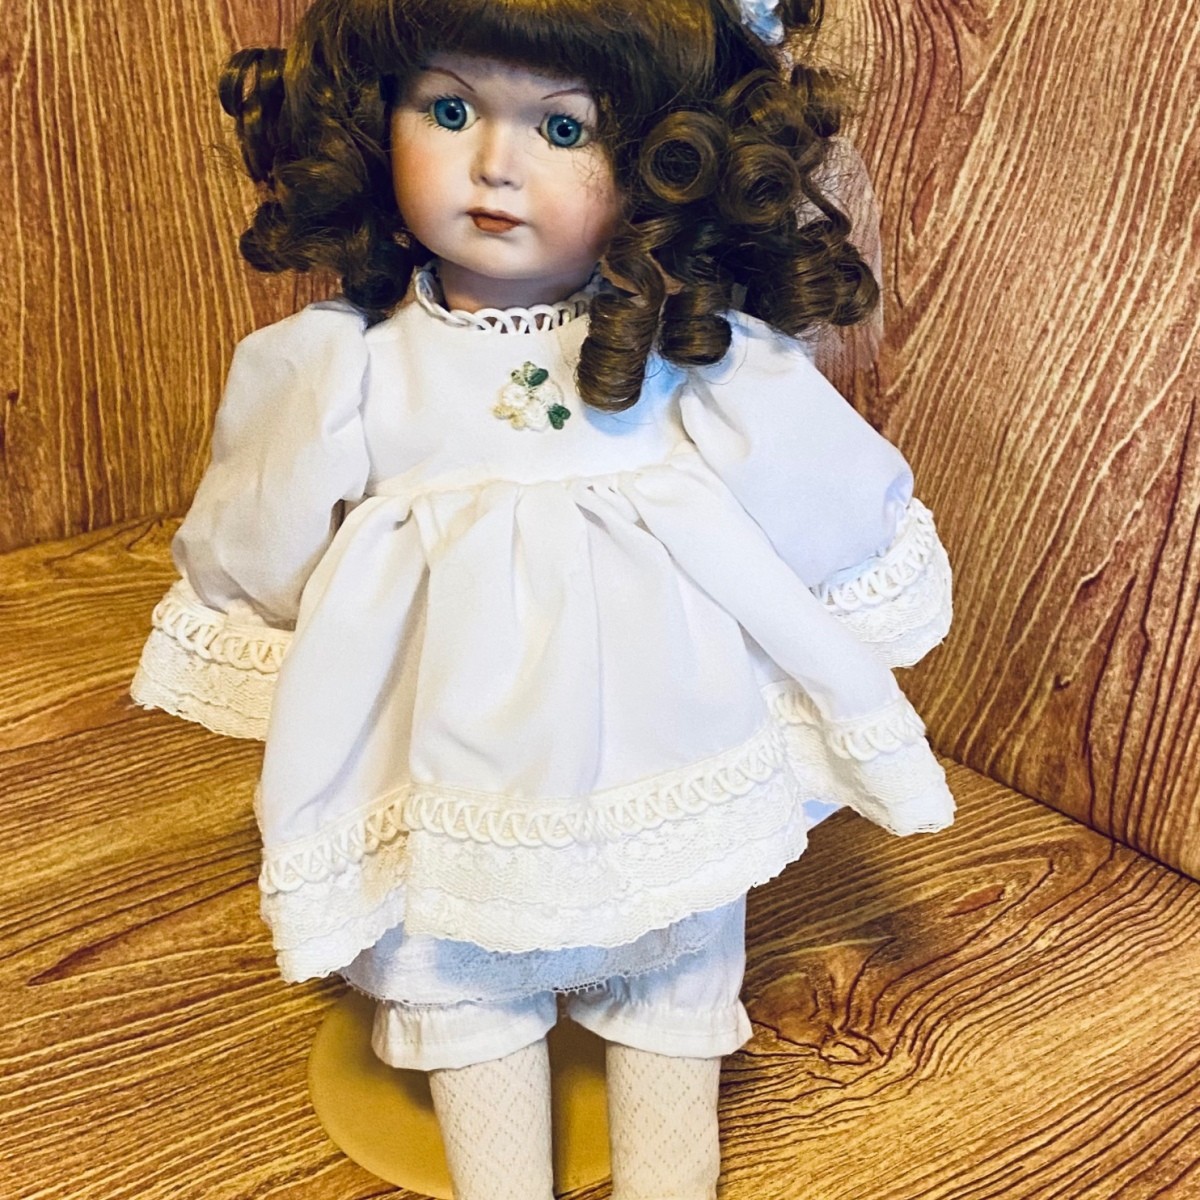 information-about-porcelain-doll-thriftyfun